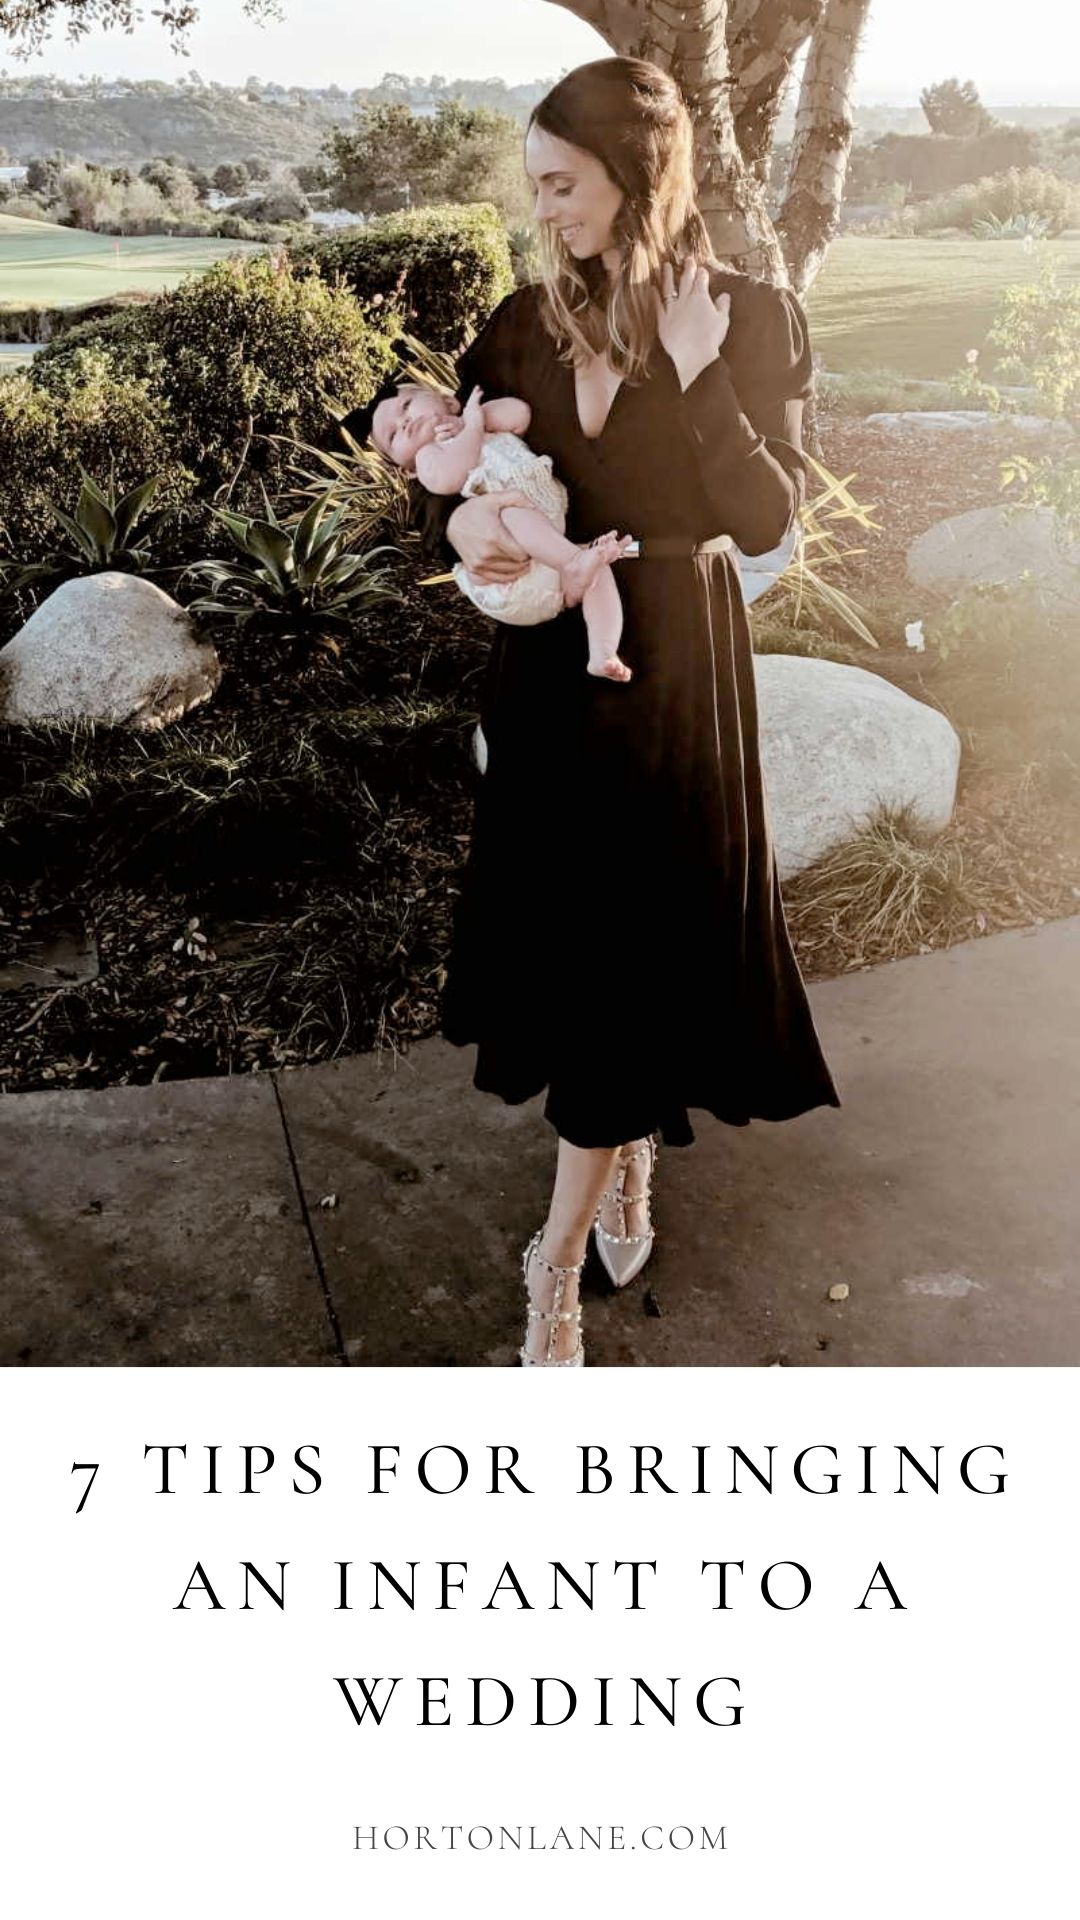 7 Tips for bringing an infant newborn to a wedding-Pinterest Pin